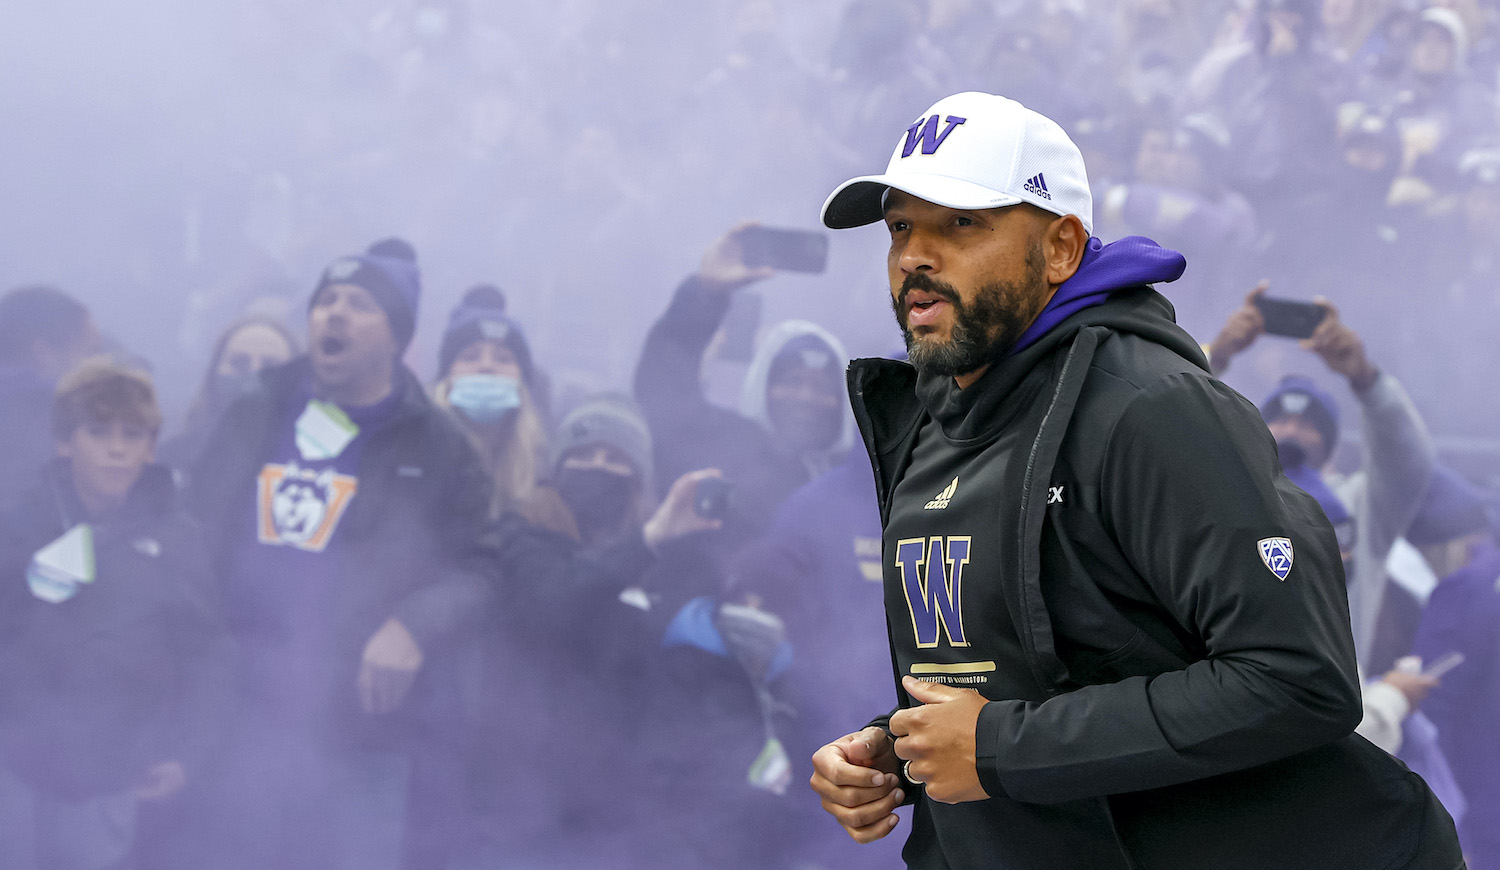 SEATTLE, WASHINGTON - NOVEMBER 06: Head coach Jimmy Lake of the Washington Huskies takes the field before the game against the Oregon Ducks at Husky Stadium on November 06, 2021 in Seattle, Washington. (Photo by Steph Chambers/Getty Images)